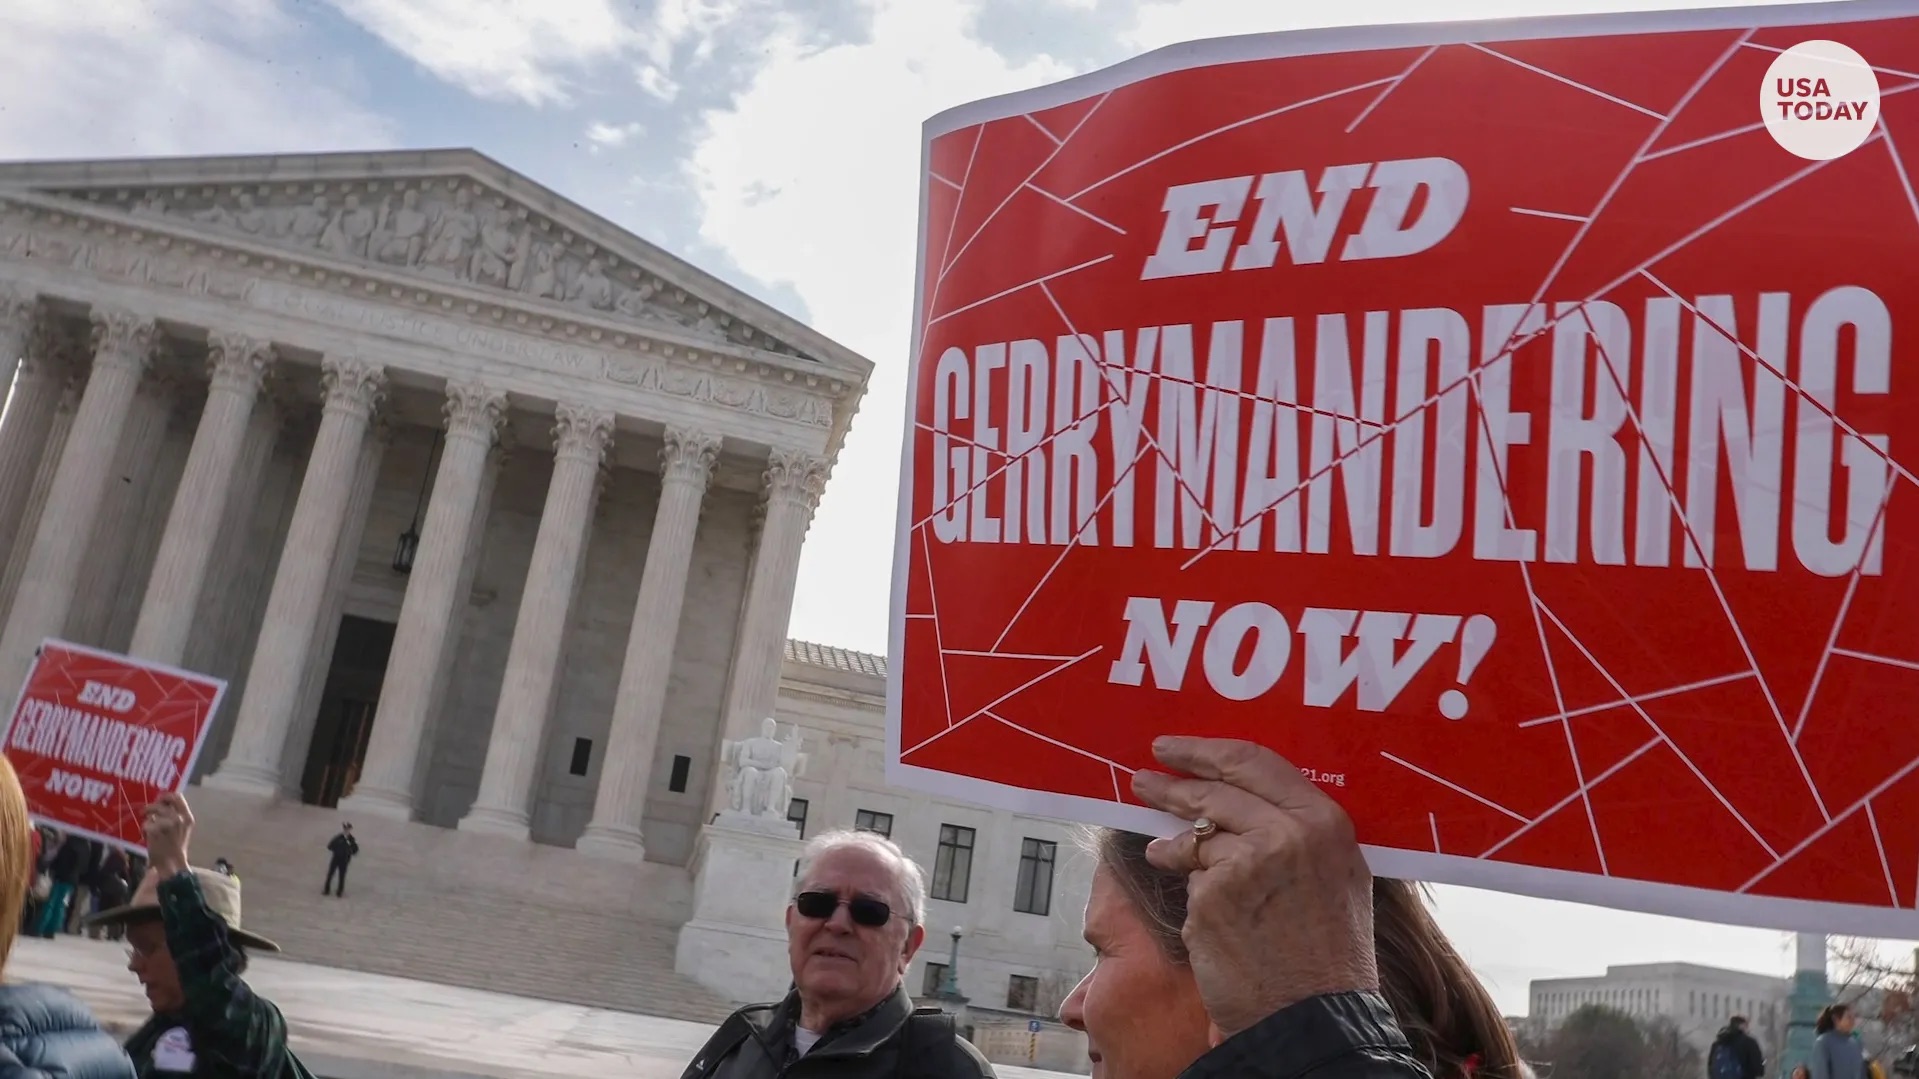 Support the call to end Prison Gerrymandering in Michigan